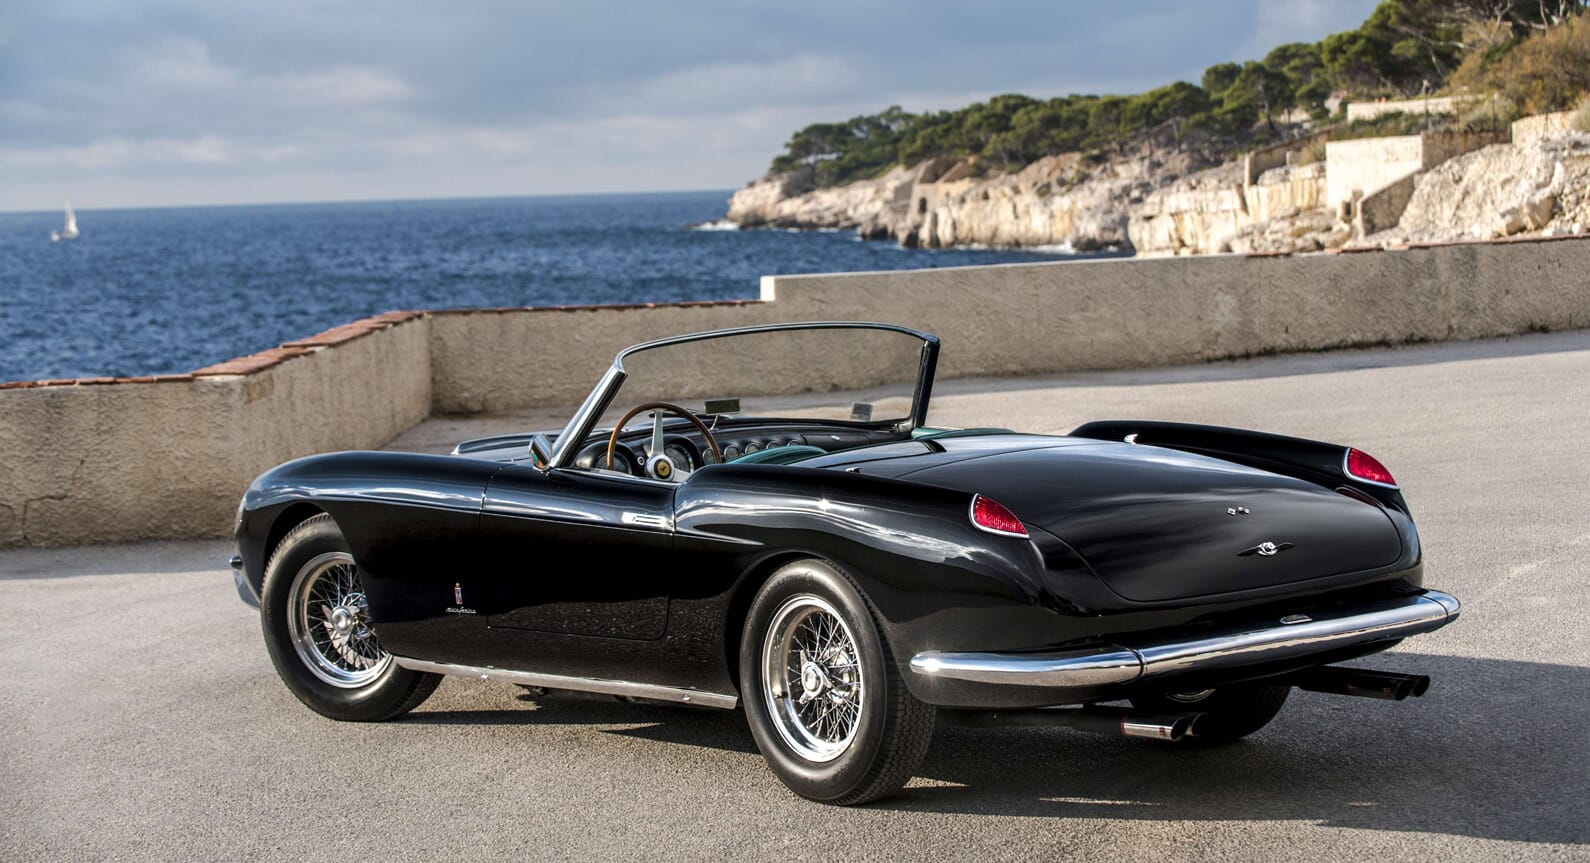 Think You’ve Seen It All? How About This Incredibly Rare Ferrari 250 GT Cabriolet